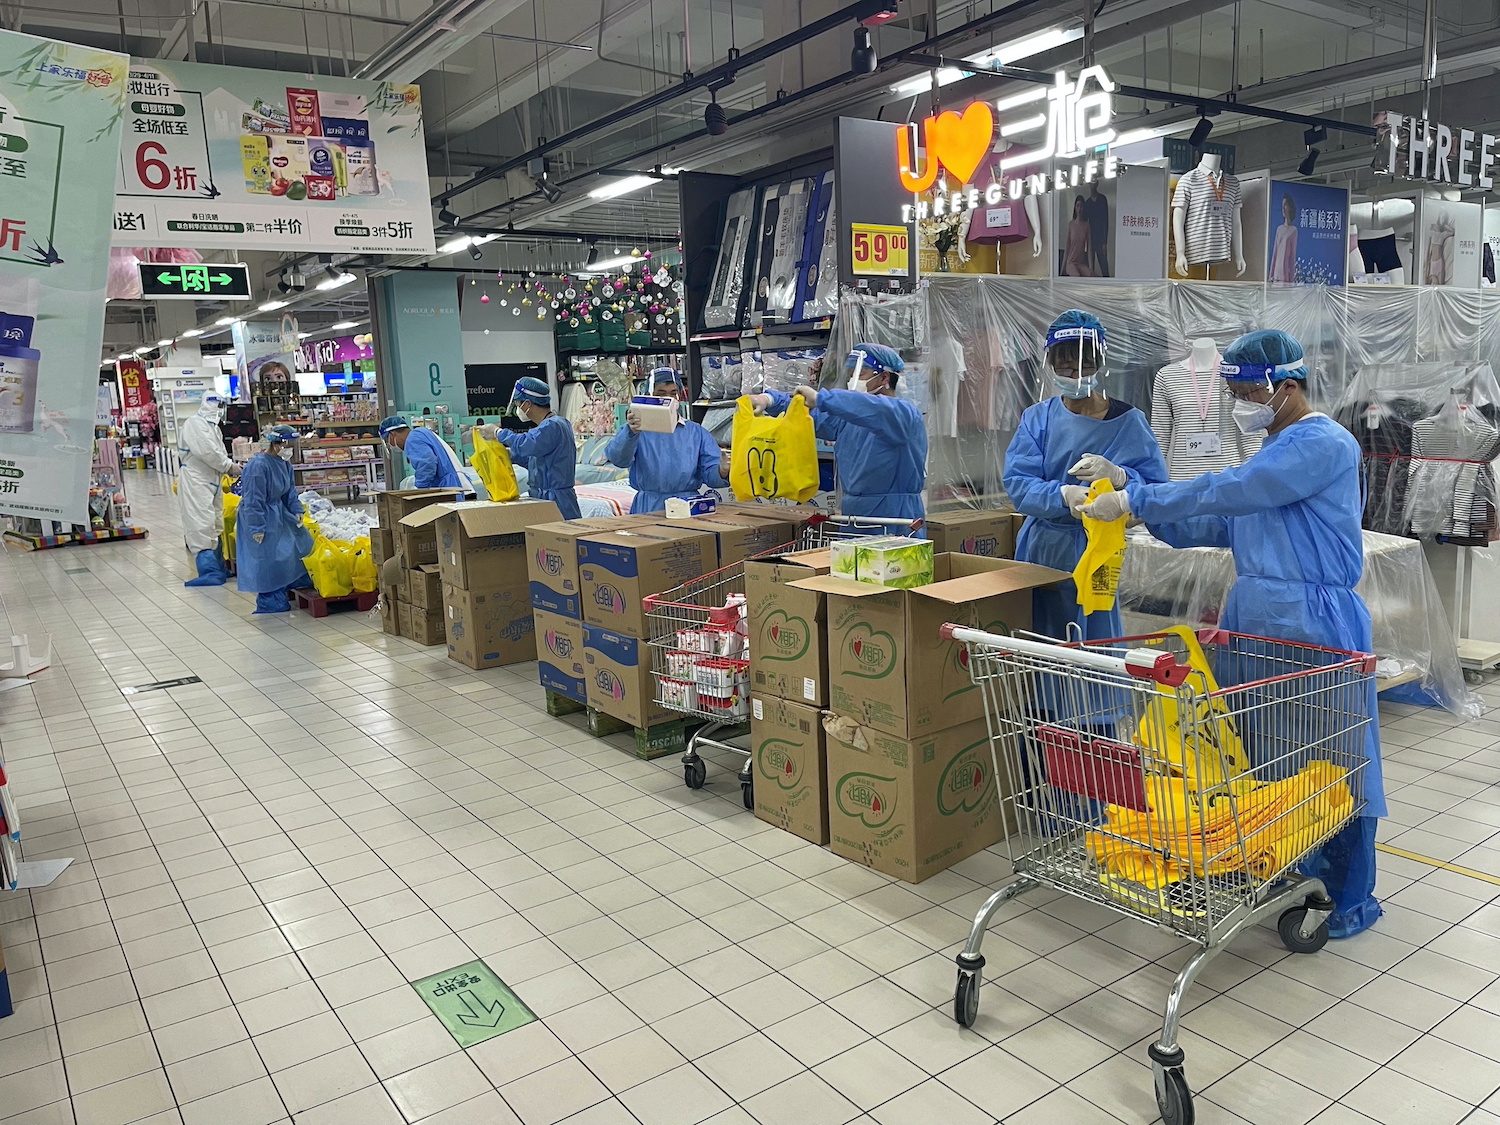 In Shanghai lockdown, Carrefour staff sleep at store to keep residents supplied